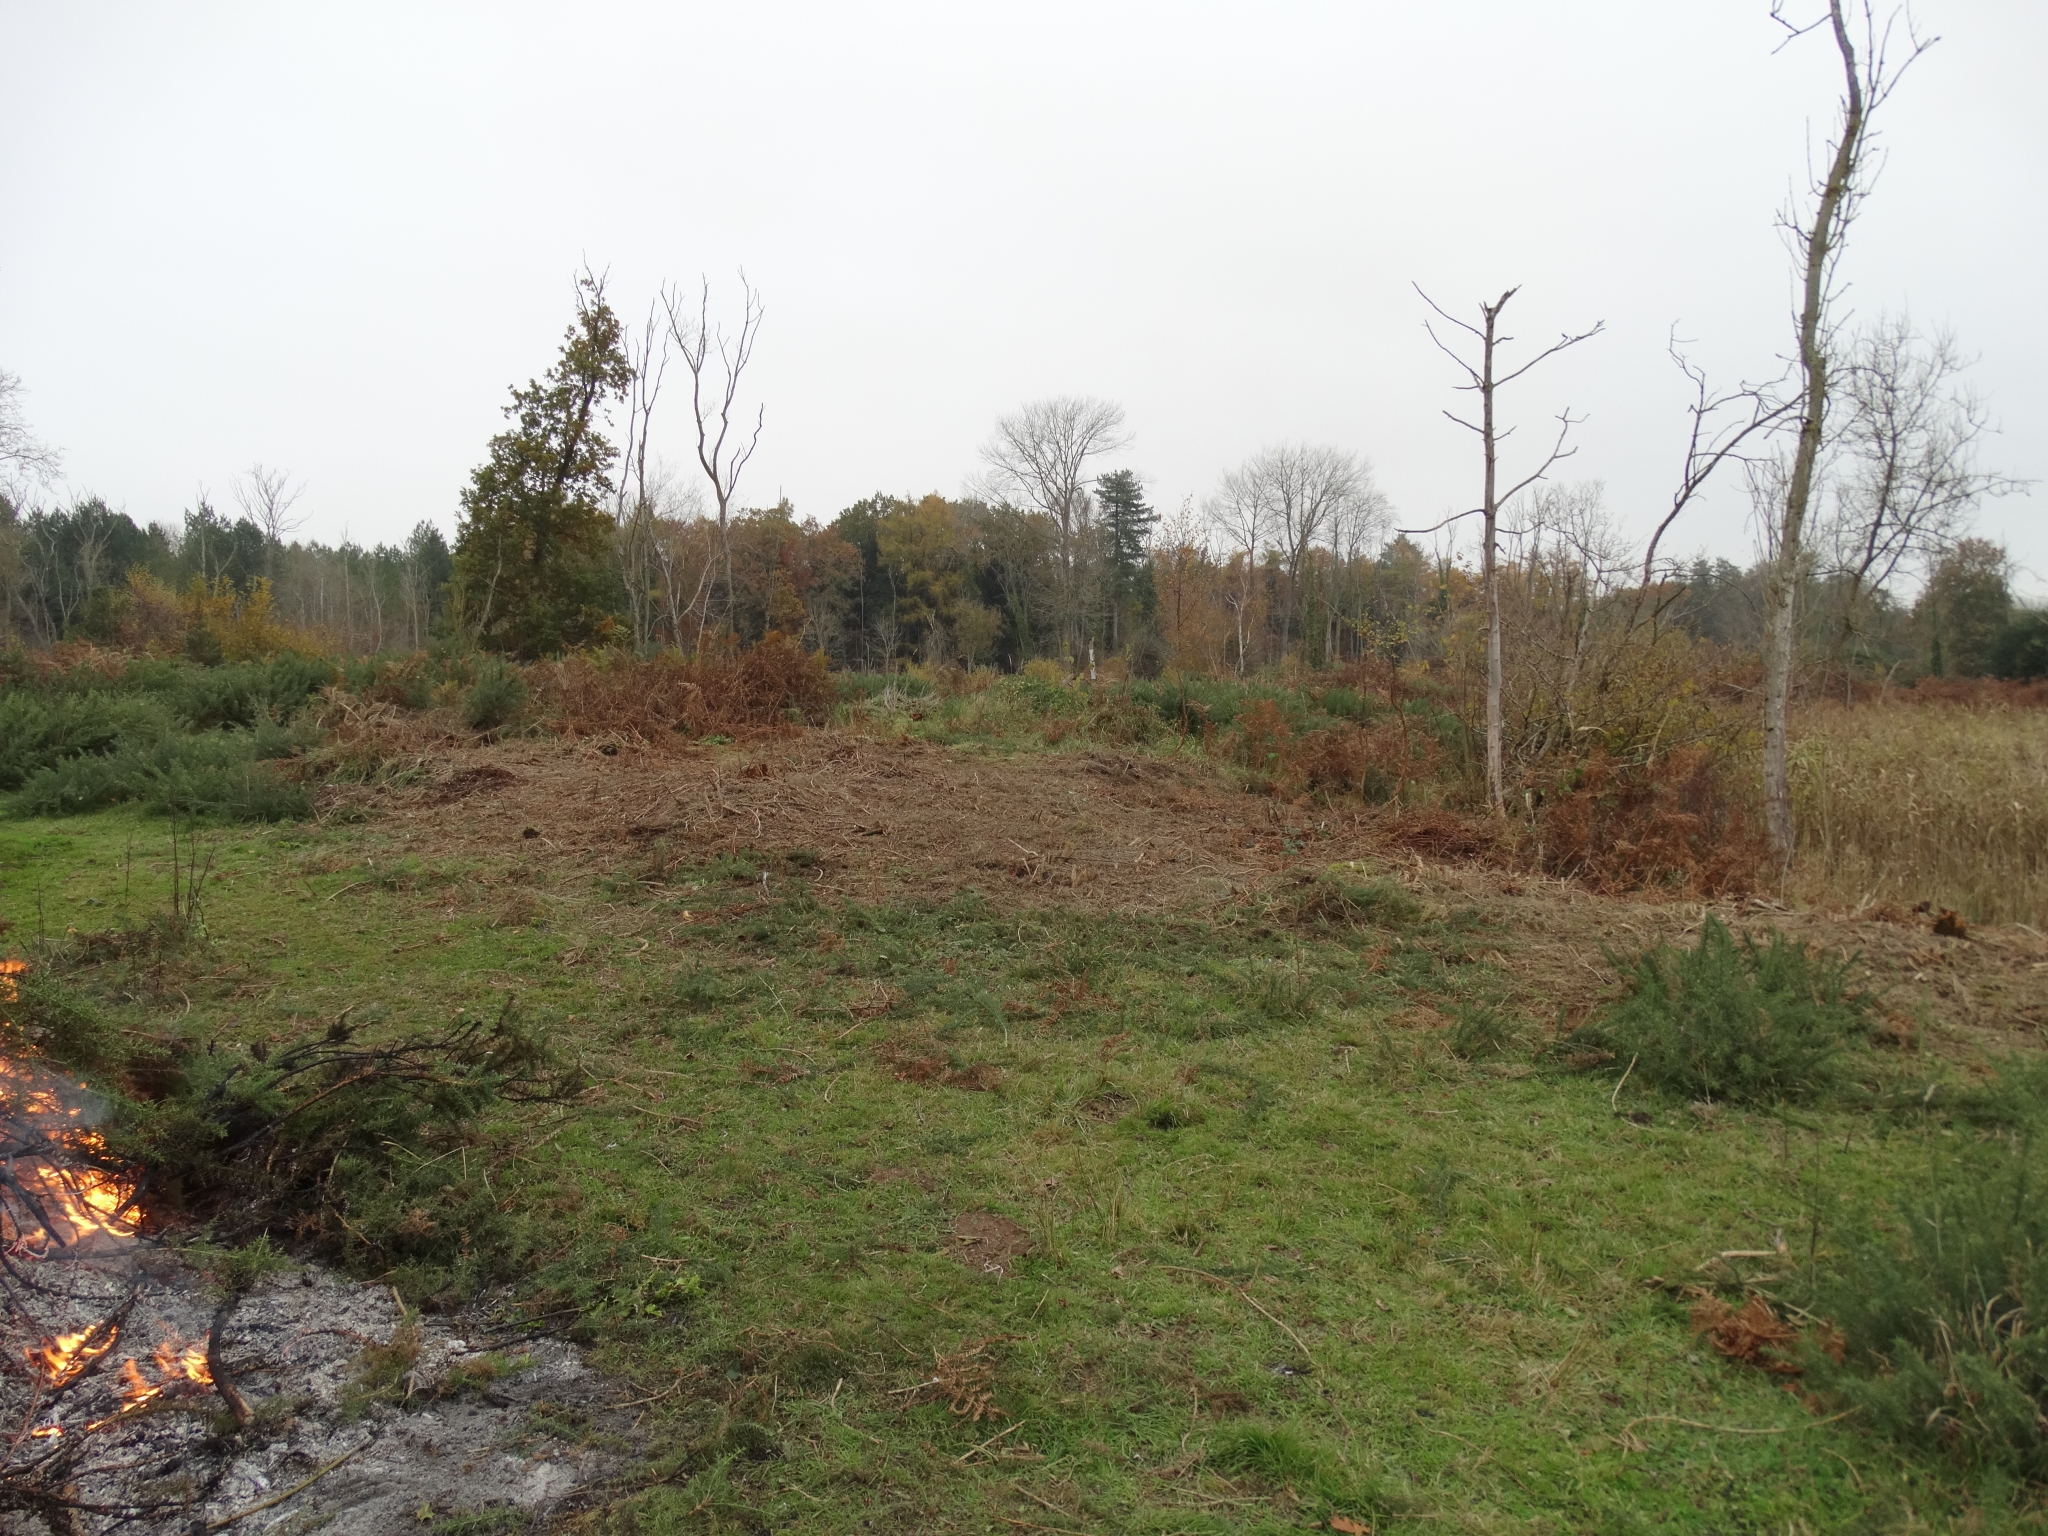 A photo from the FoTF Conservation Event - November 2019 - Gorse Clearance at Hockham Hills & Holes : An area cleared of Gorse by volunteers, with the fire just visible